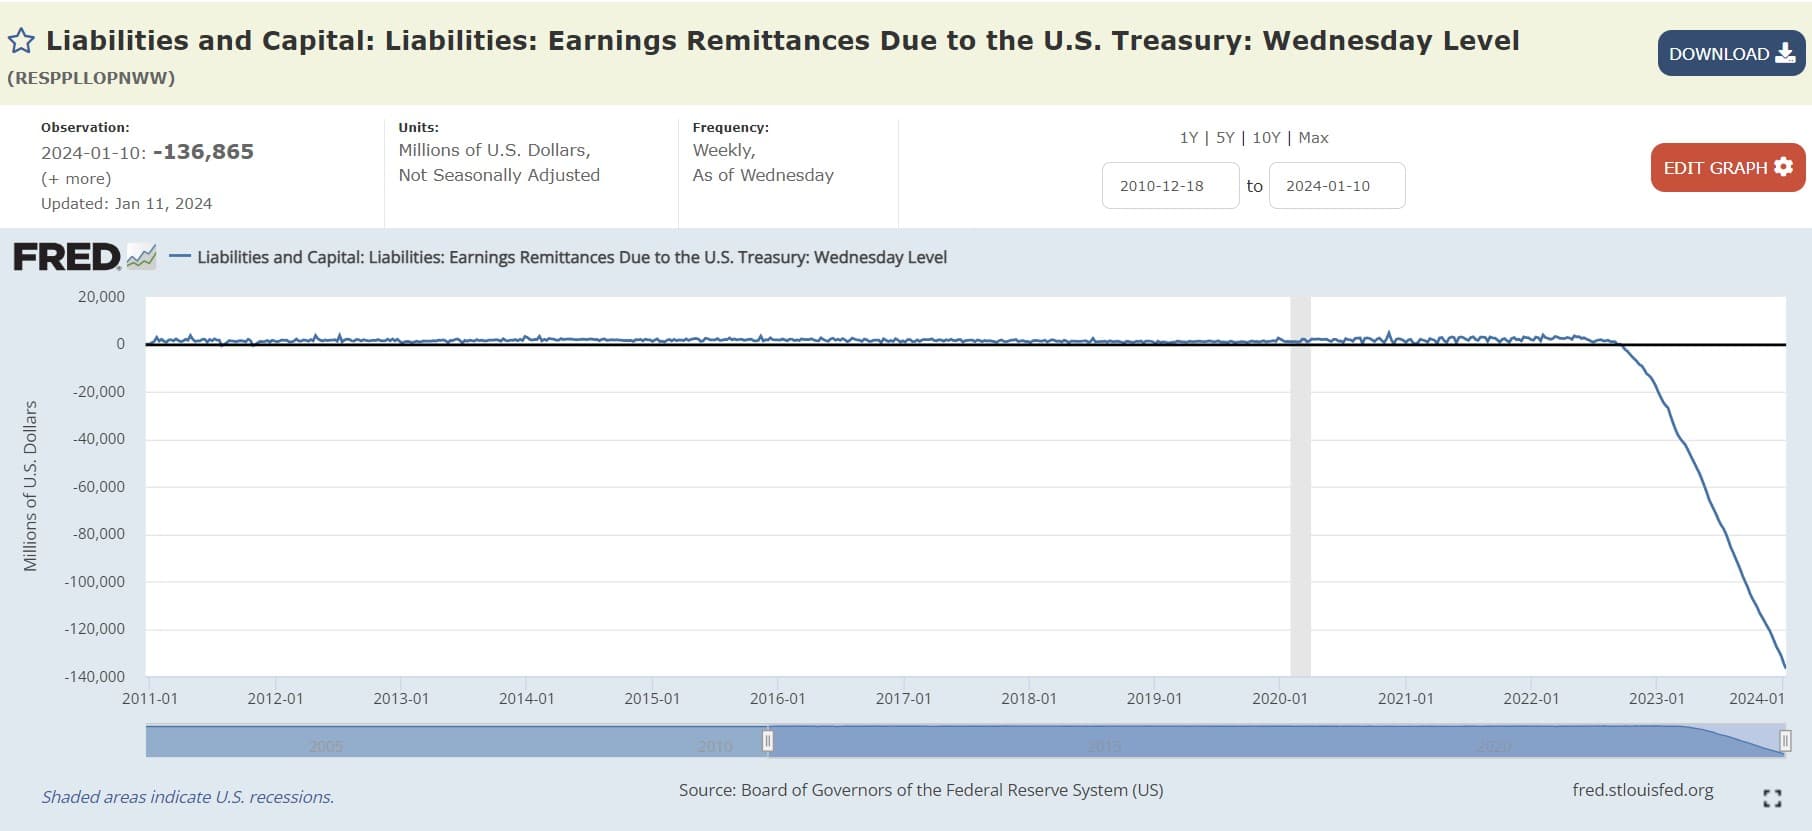 Liabilities and Capital: Liabilities: Earnings Remittances Due to the U.S. Treasury